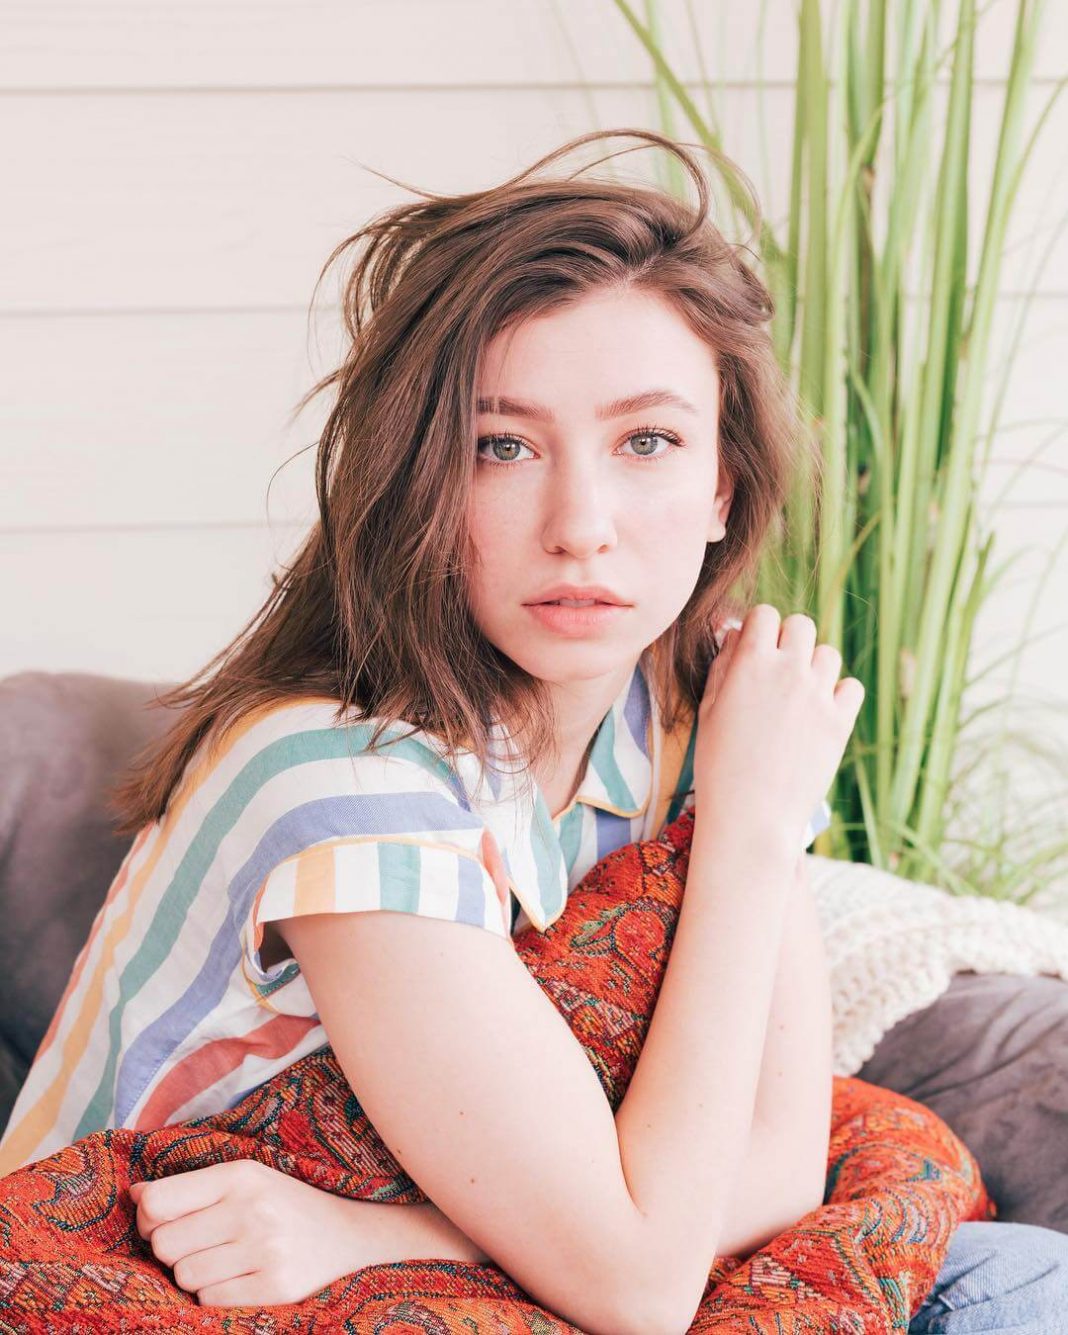 50 Katelyn Nacon Nude Pictures Which Prove Beauty Beyond Recognition 386